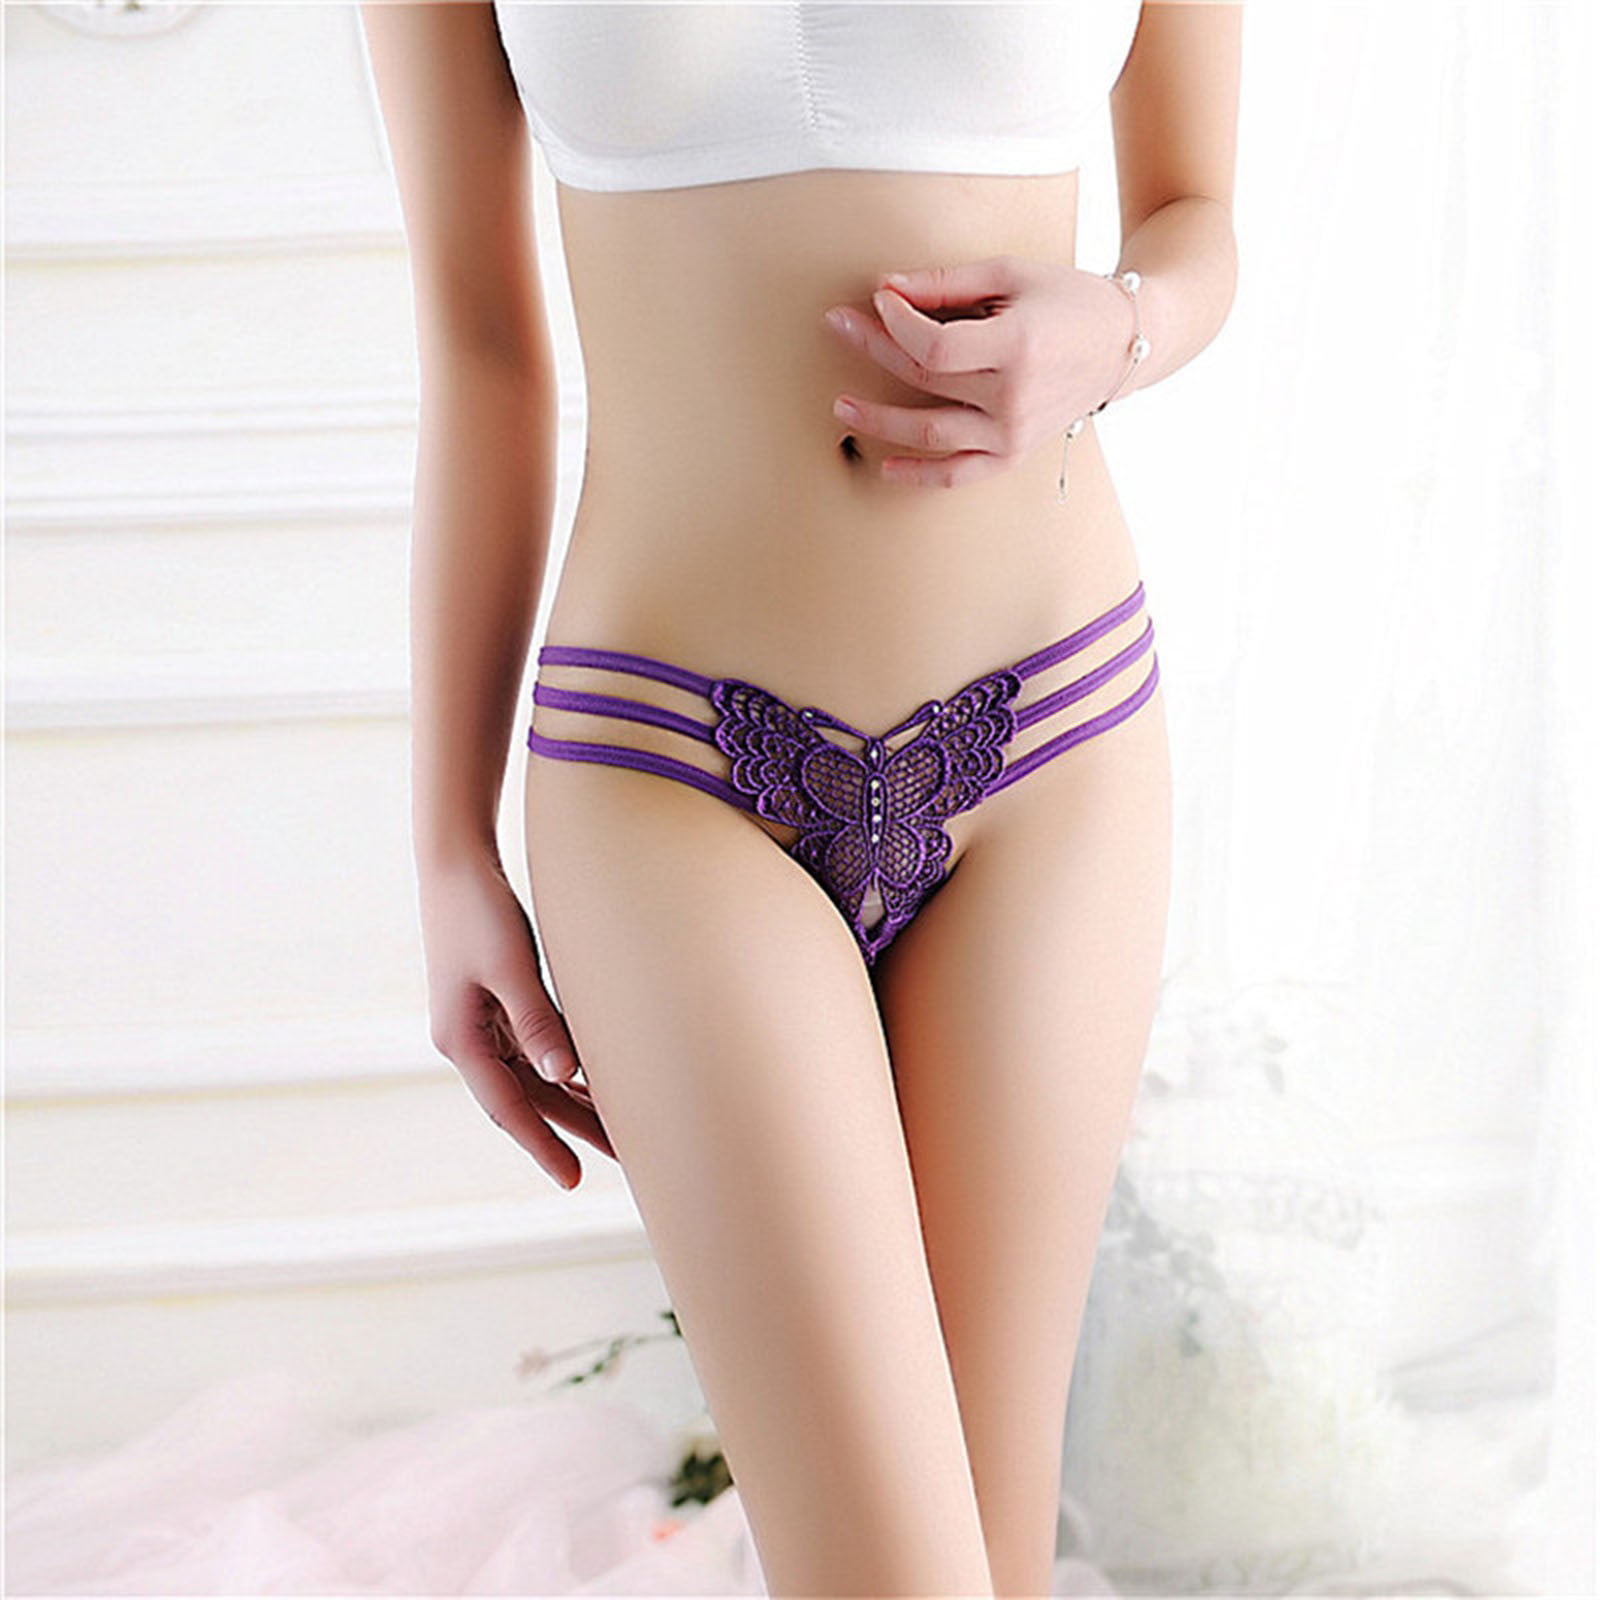 zuwimk G String Thongs For Women,High Waisted Lace Thong for Women Cotton  Underwear Plus Size Purple,One Size 